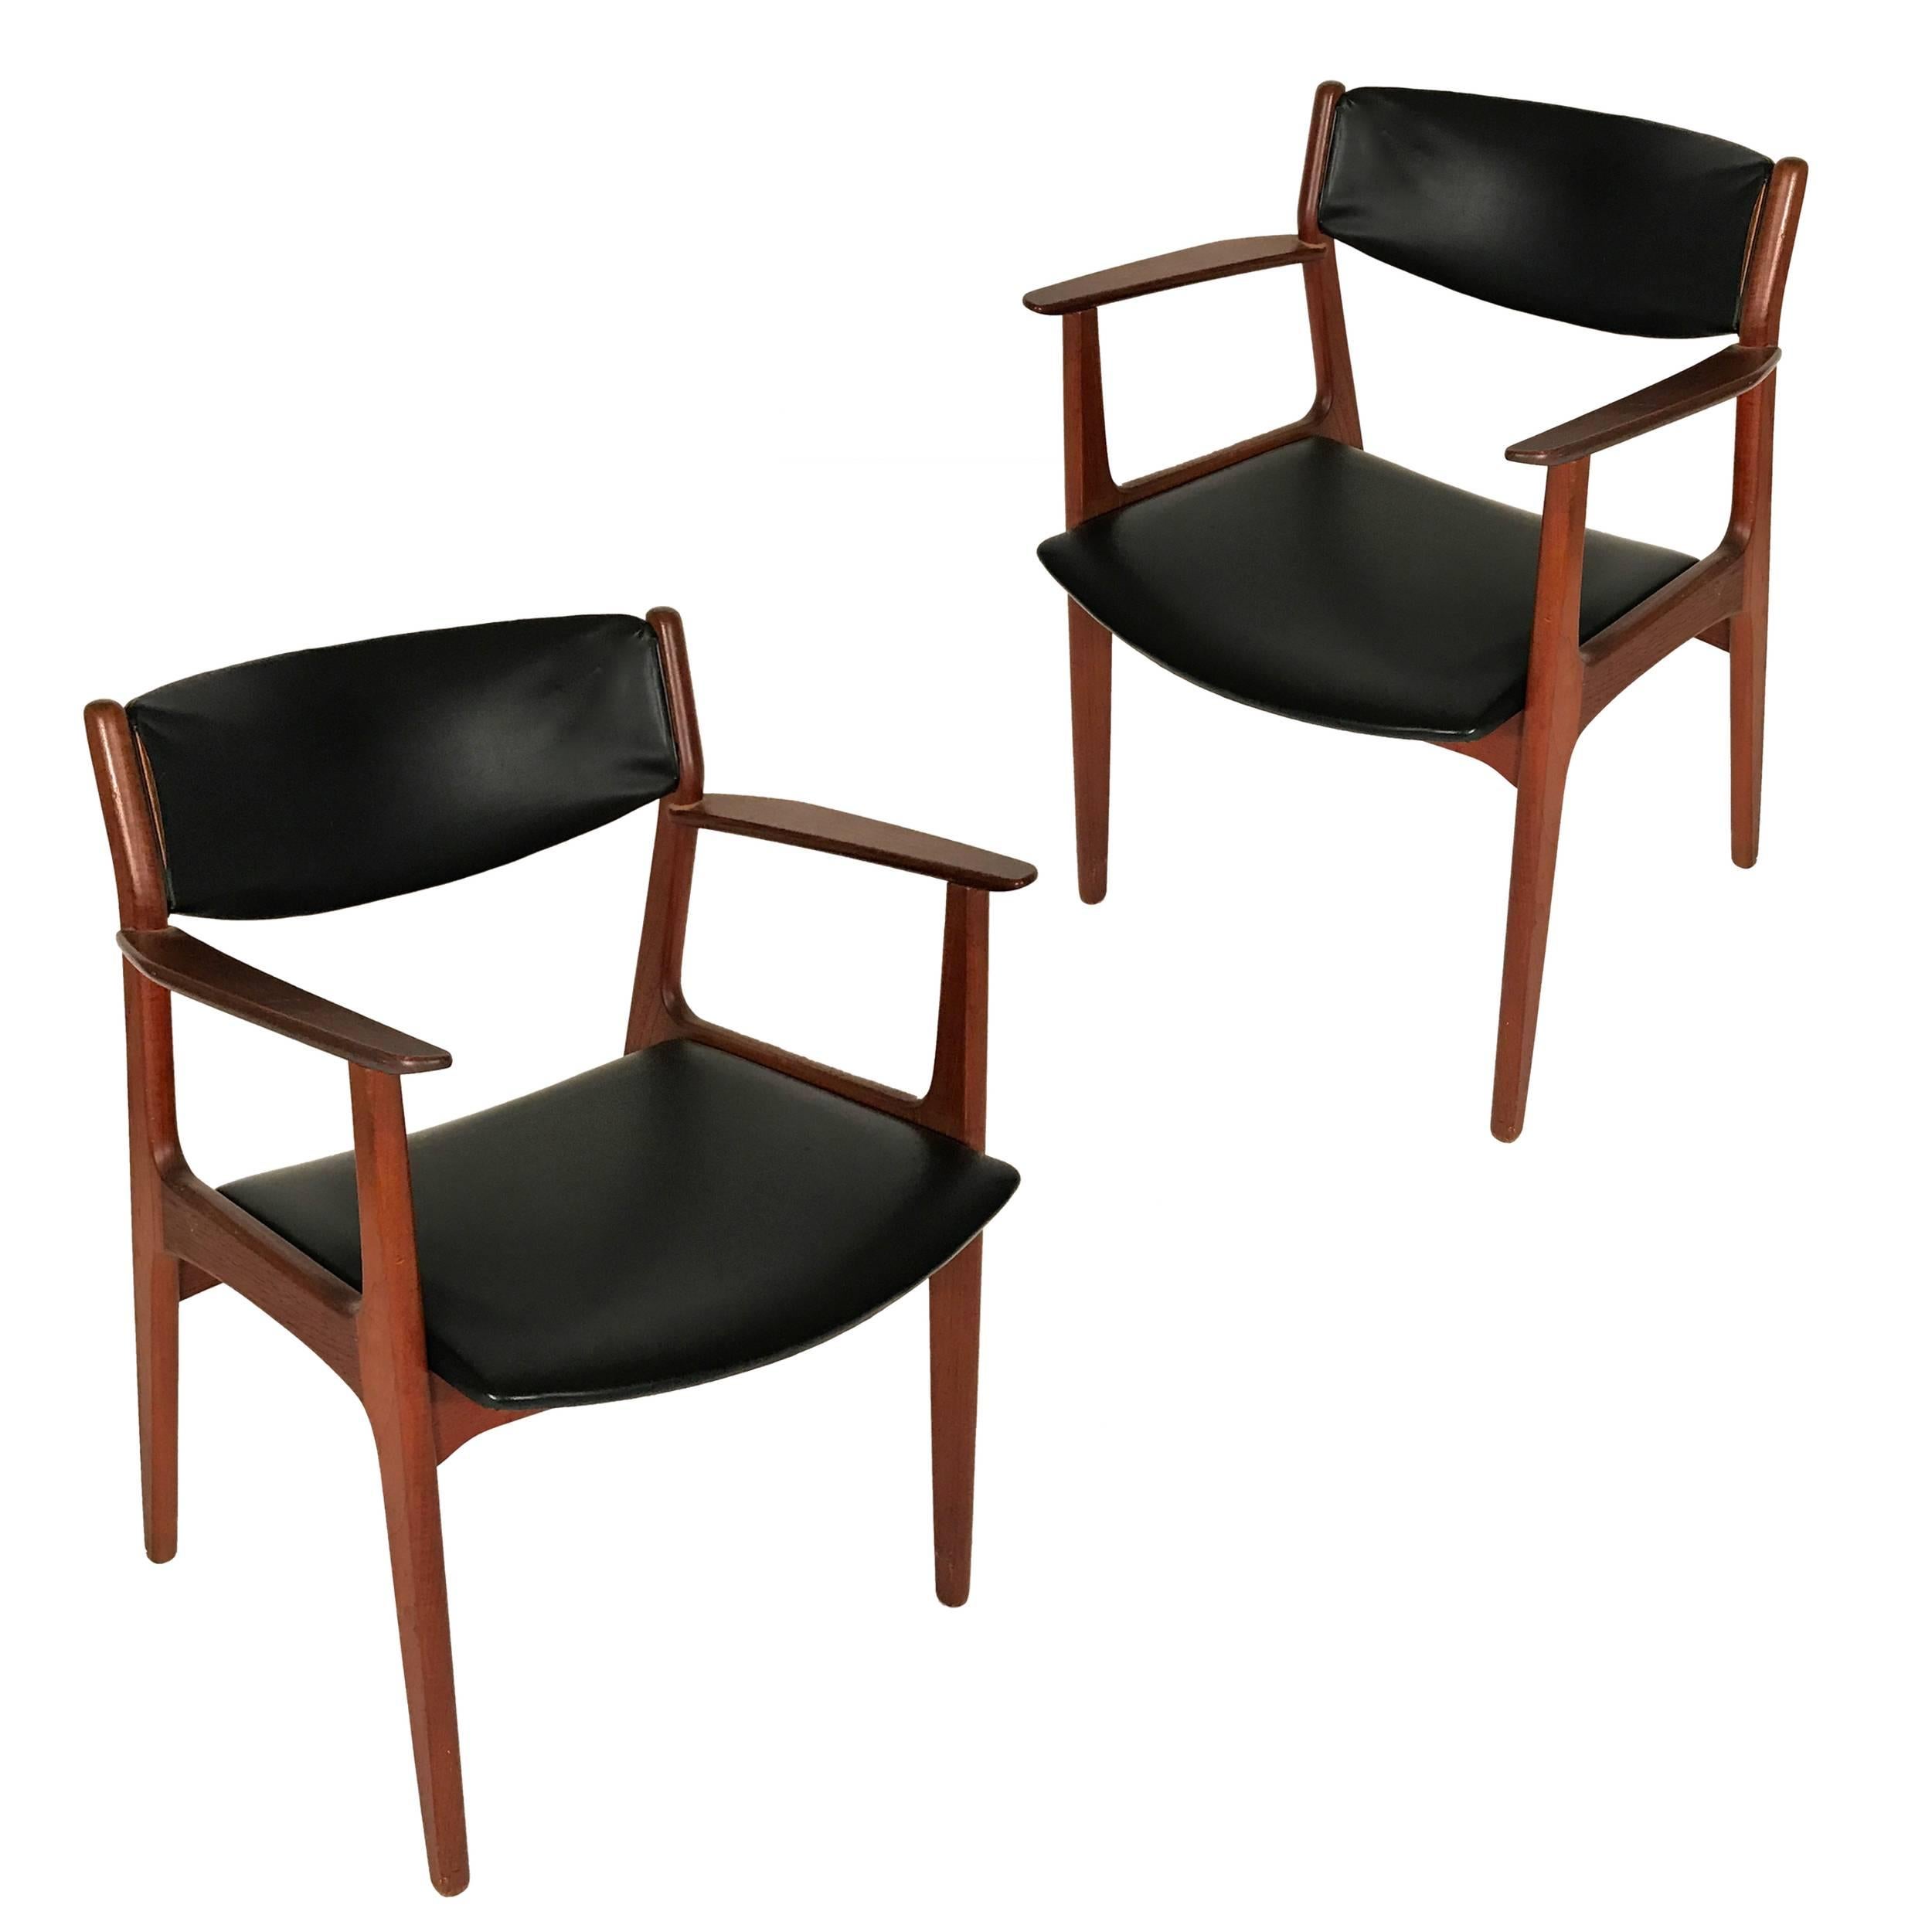 Pair of Danish chairs by George Tanier. Solid teak frames with Naugahyde seats and backs. Stunning sculptural design attributed to Arne Vodder.